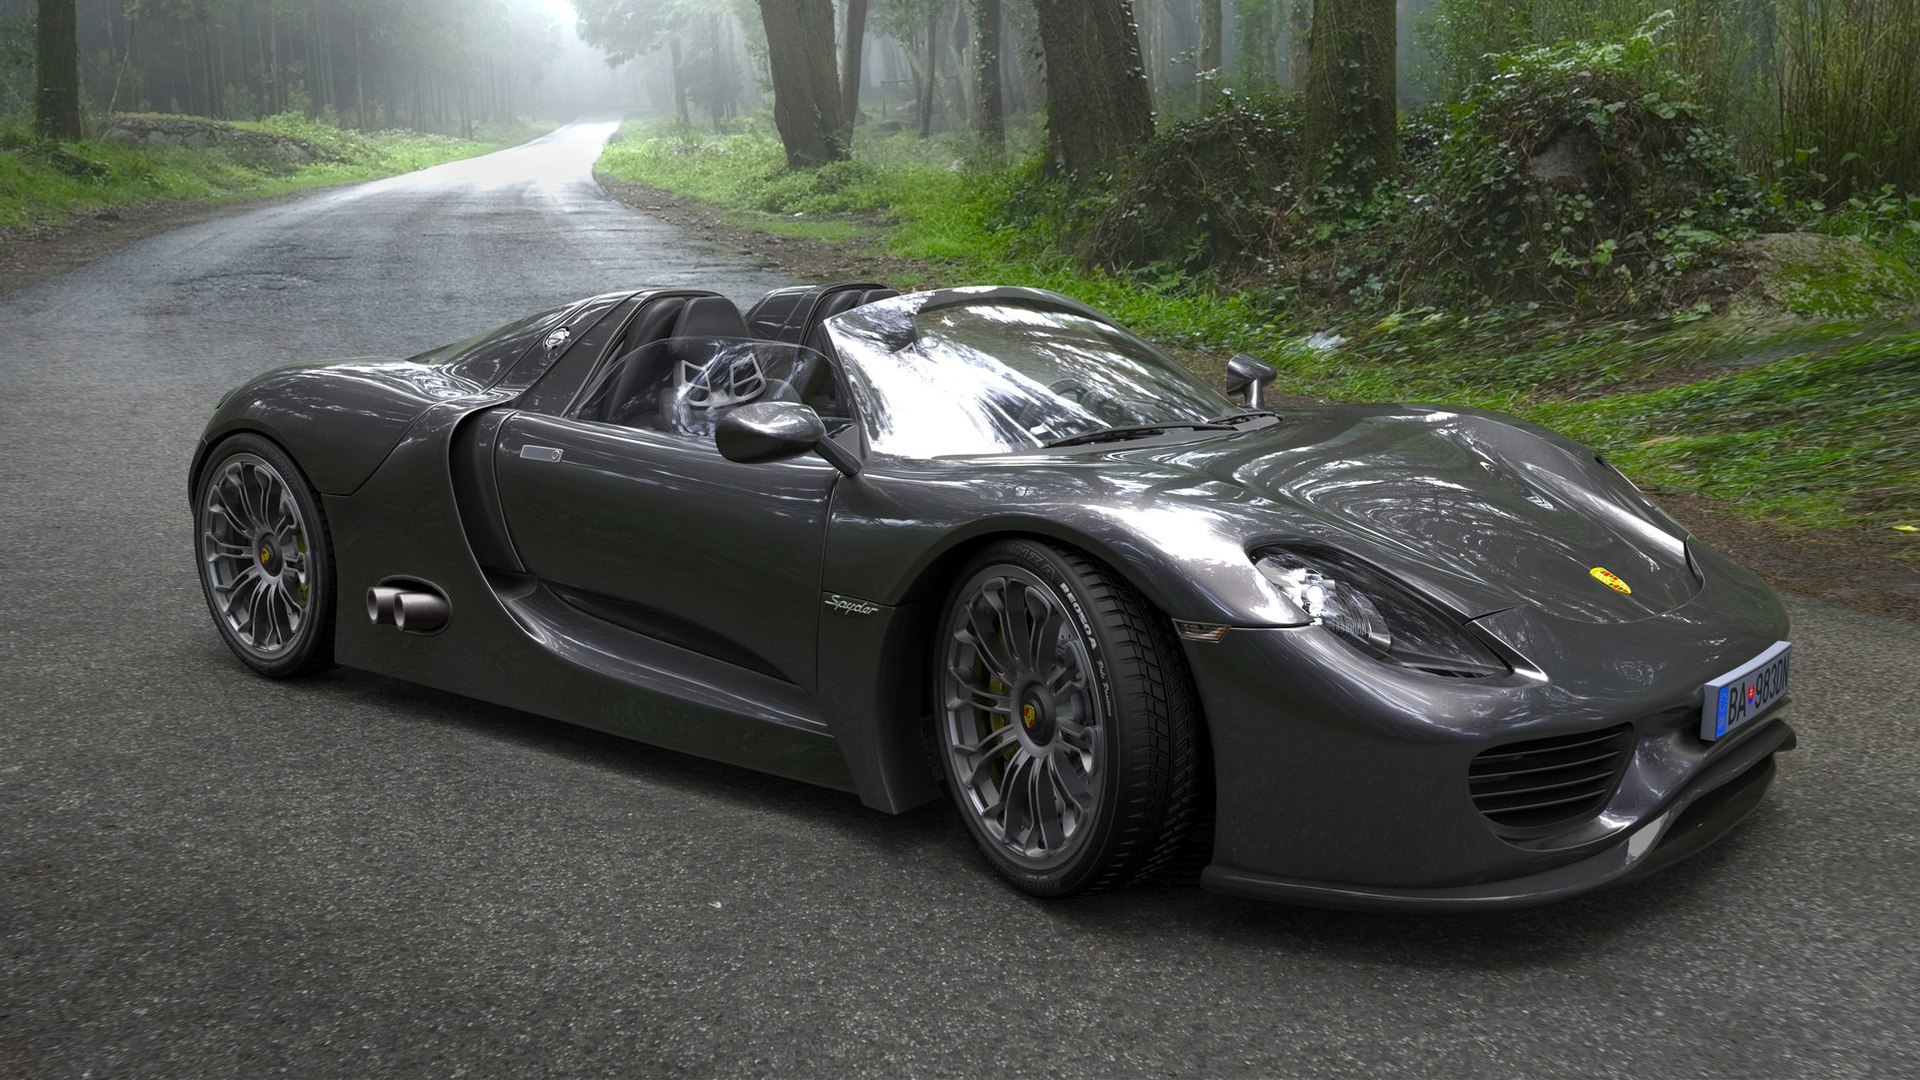 Double Car Porsche 918 Spyder wallpapers and images   wallpapers